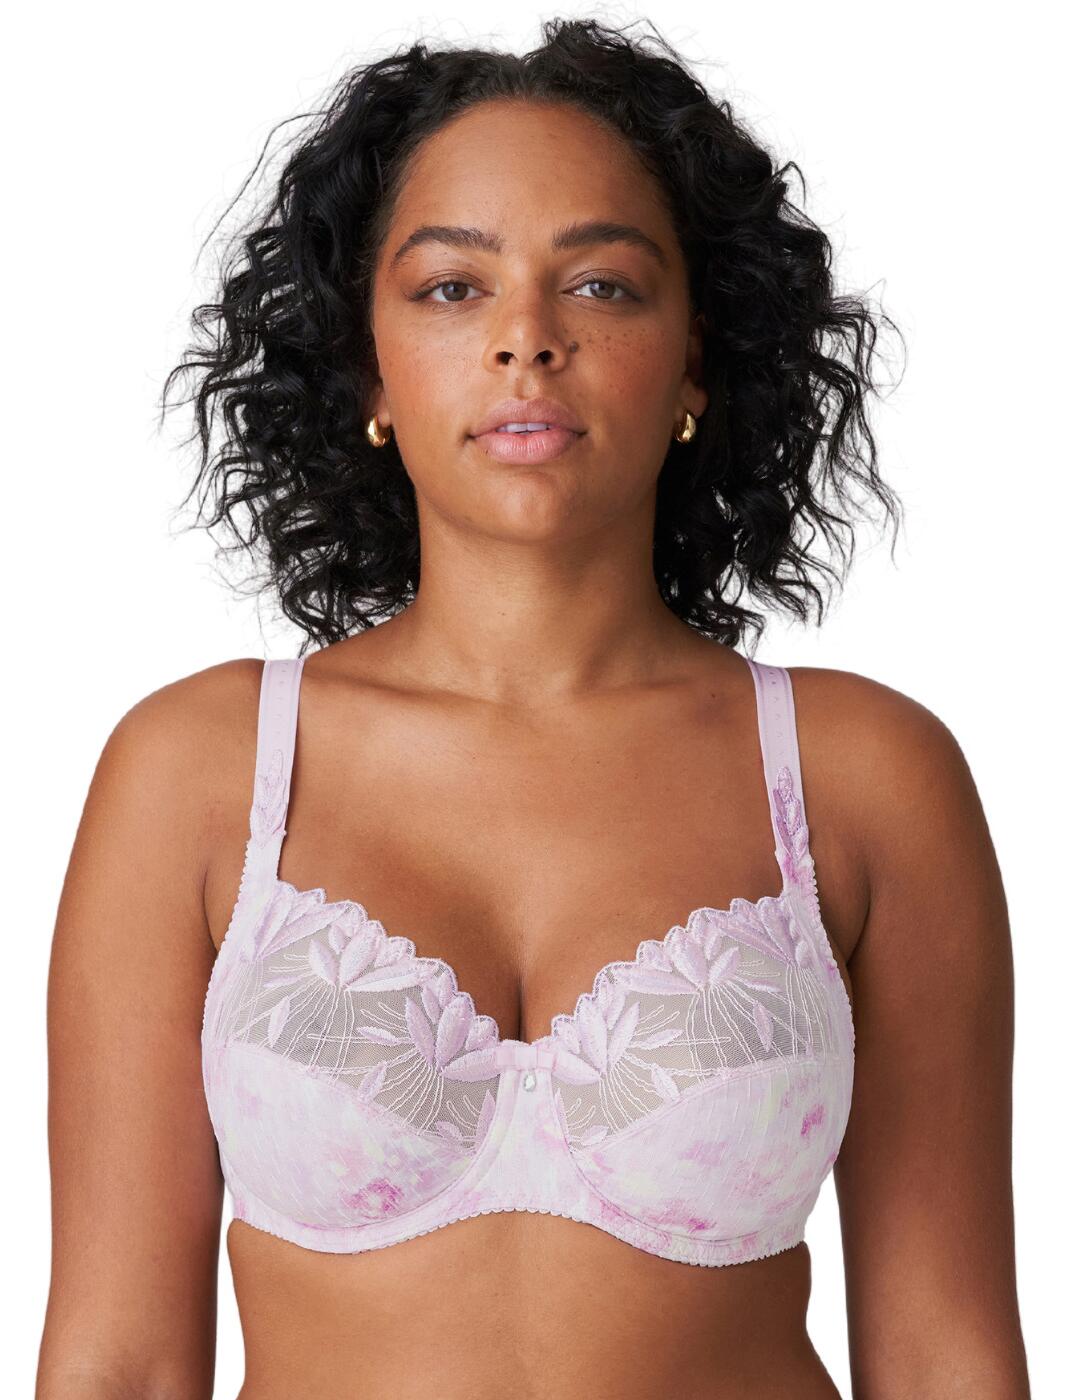 PrimaDonna Bras and Lingerie, Free UK Shipping